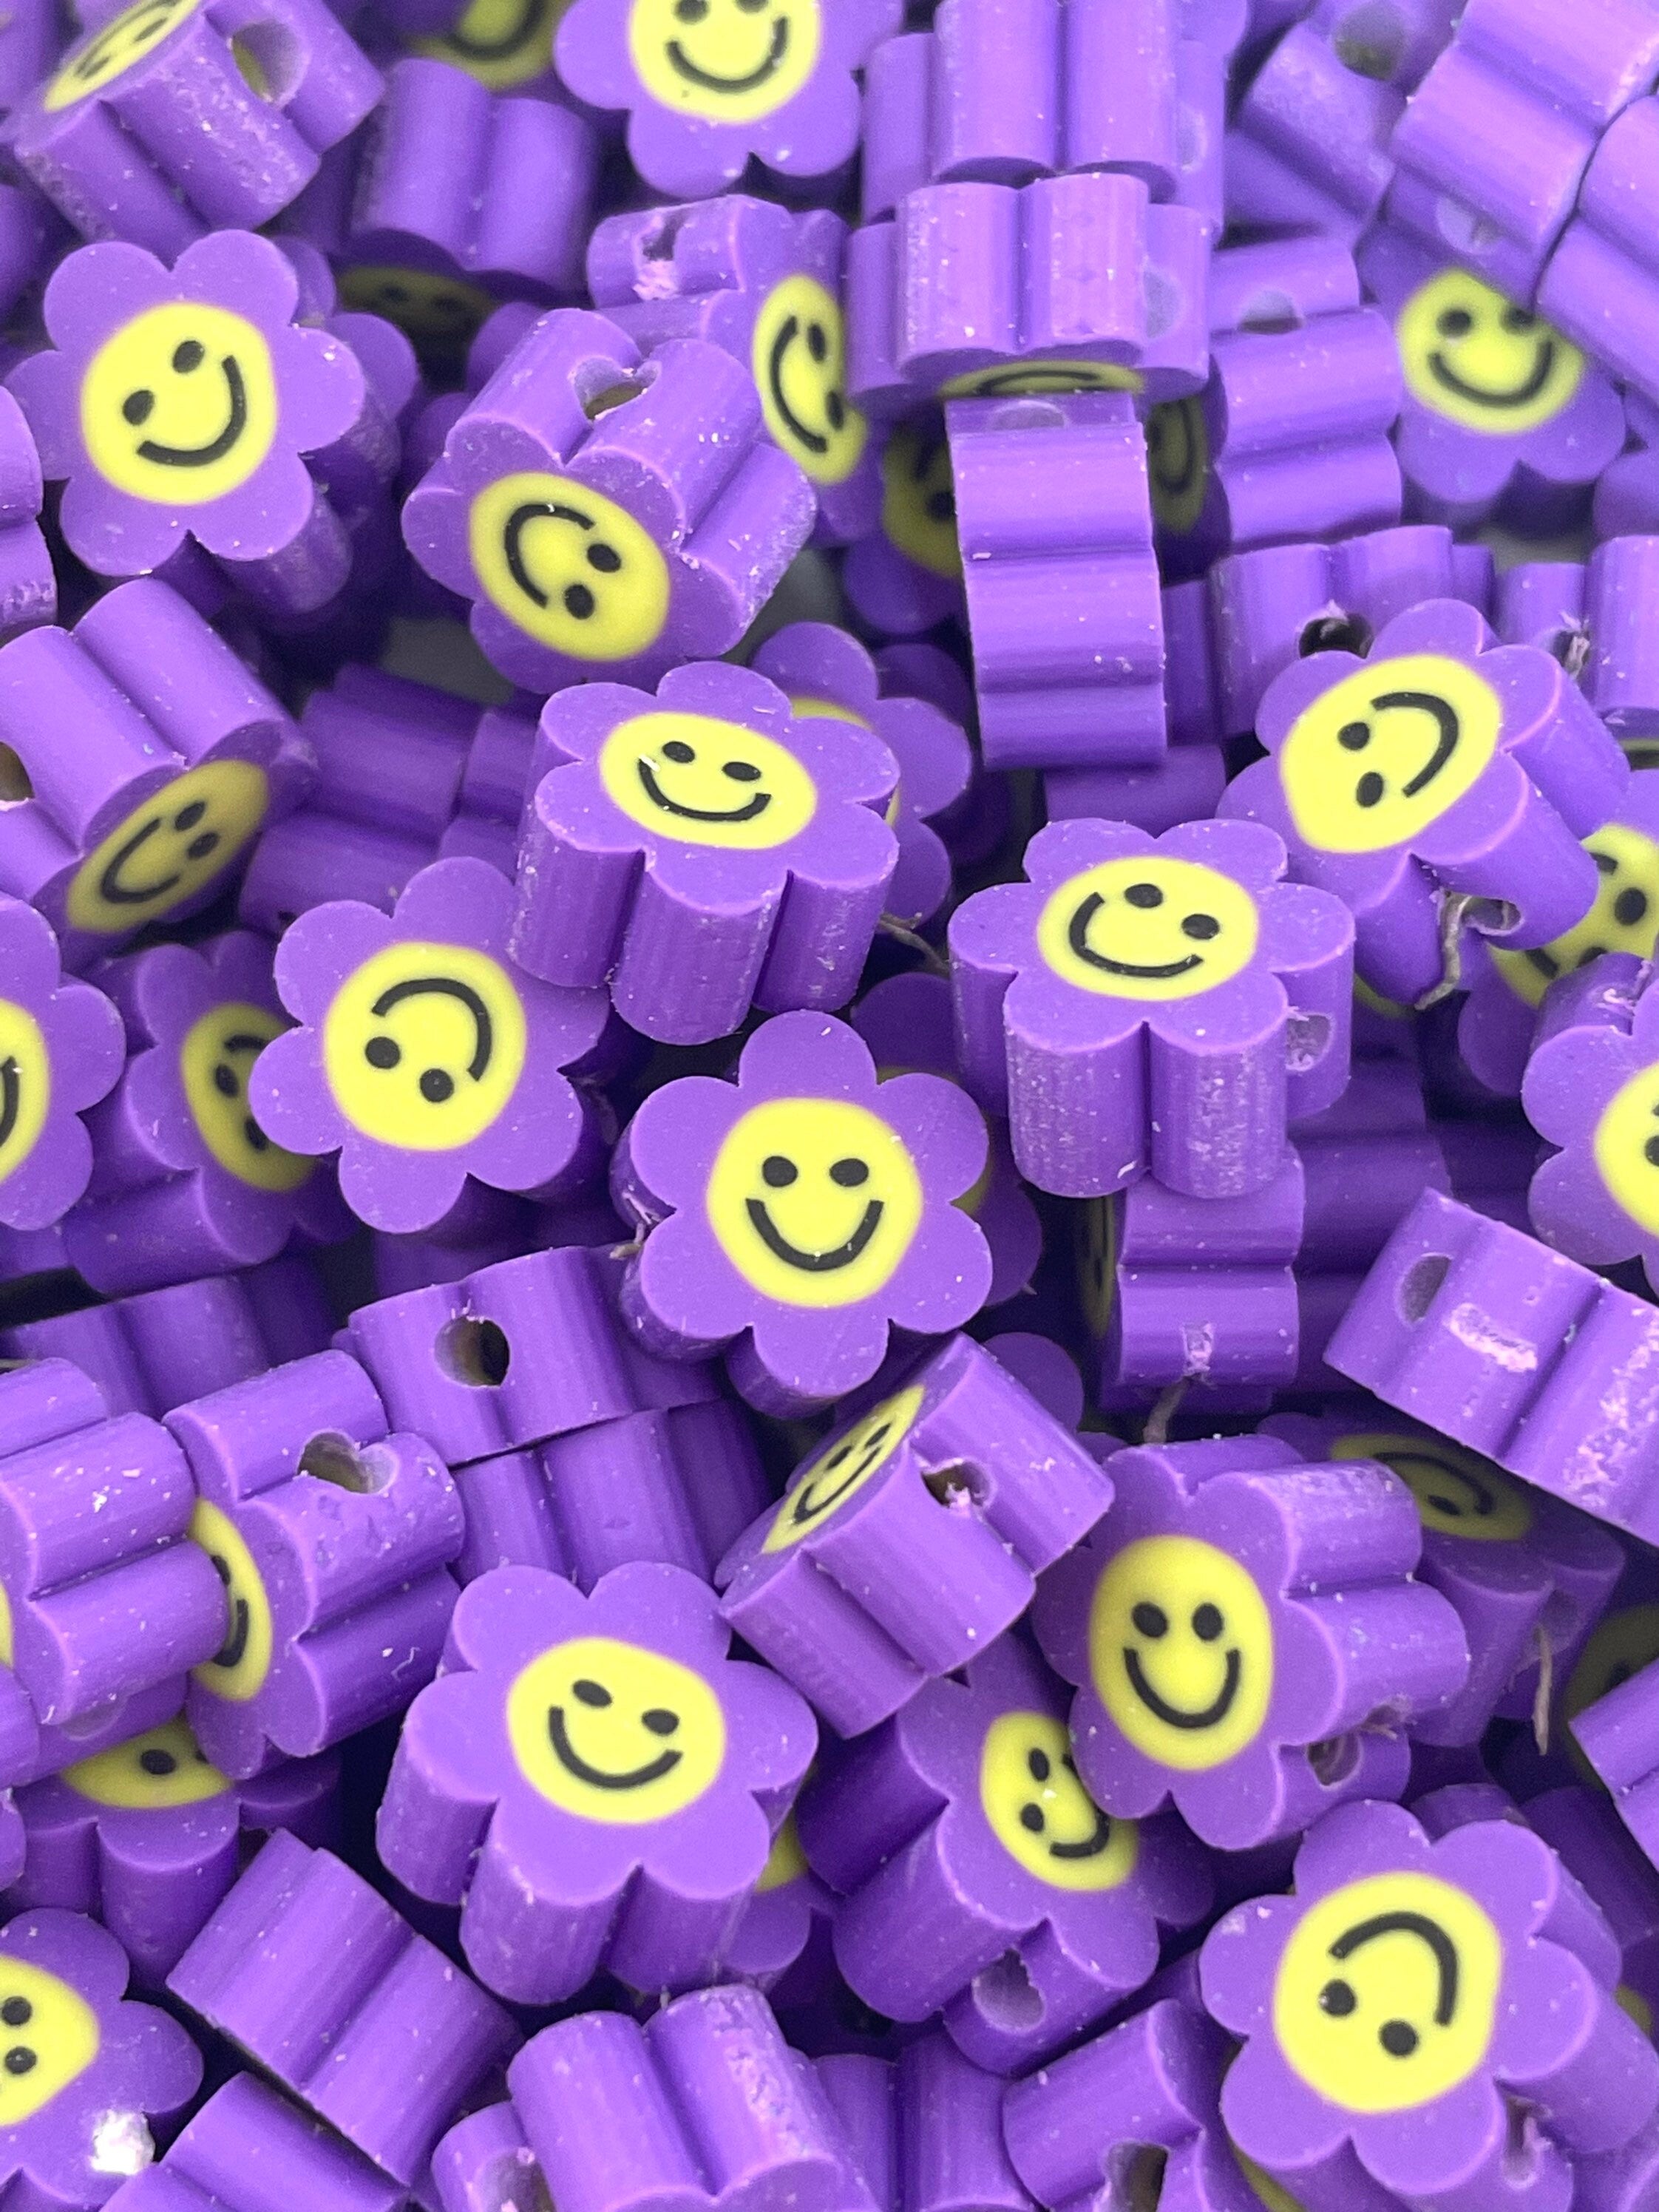 SMOL Flower Beads, Cute Clay Purple Flowers with Faces, Alice and Wond